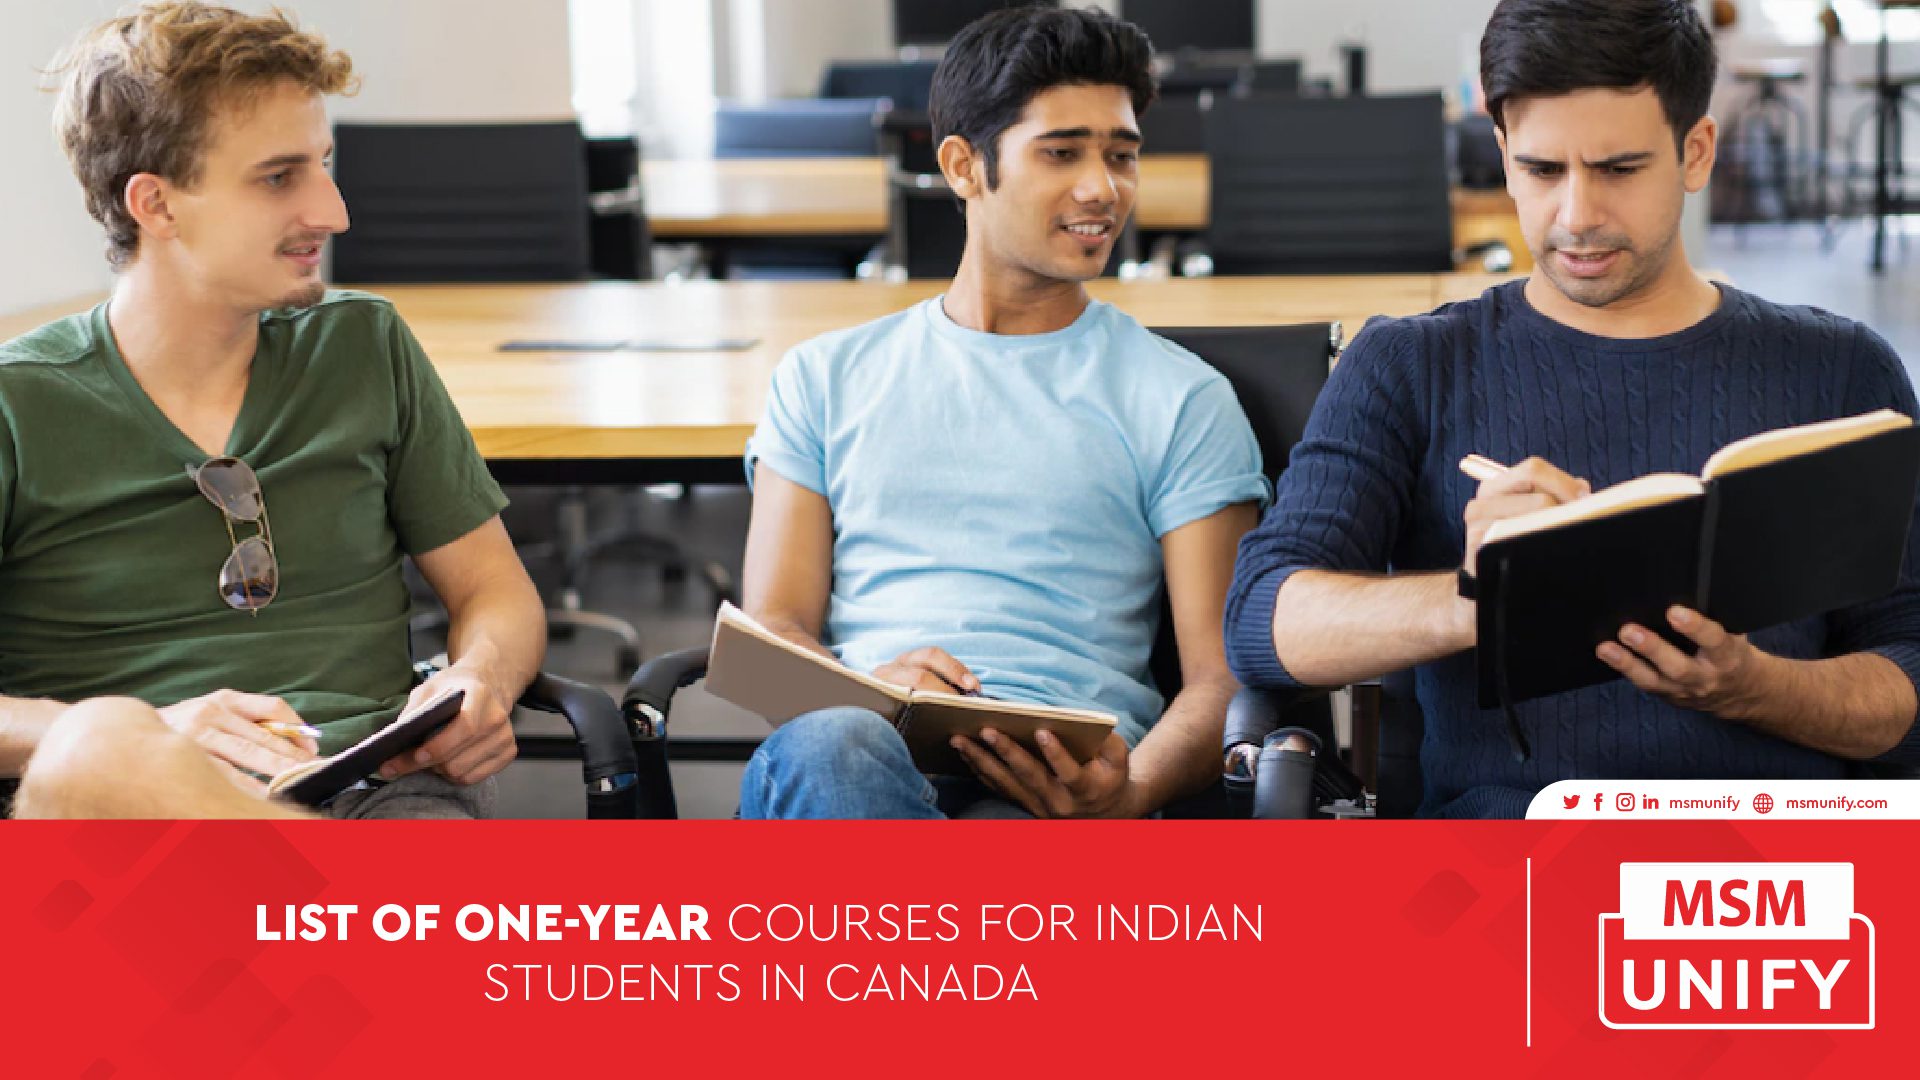 121622 MSM Unify List of One Year Courses for Indian Students in Canada 01